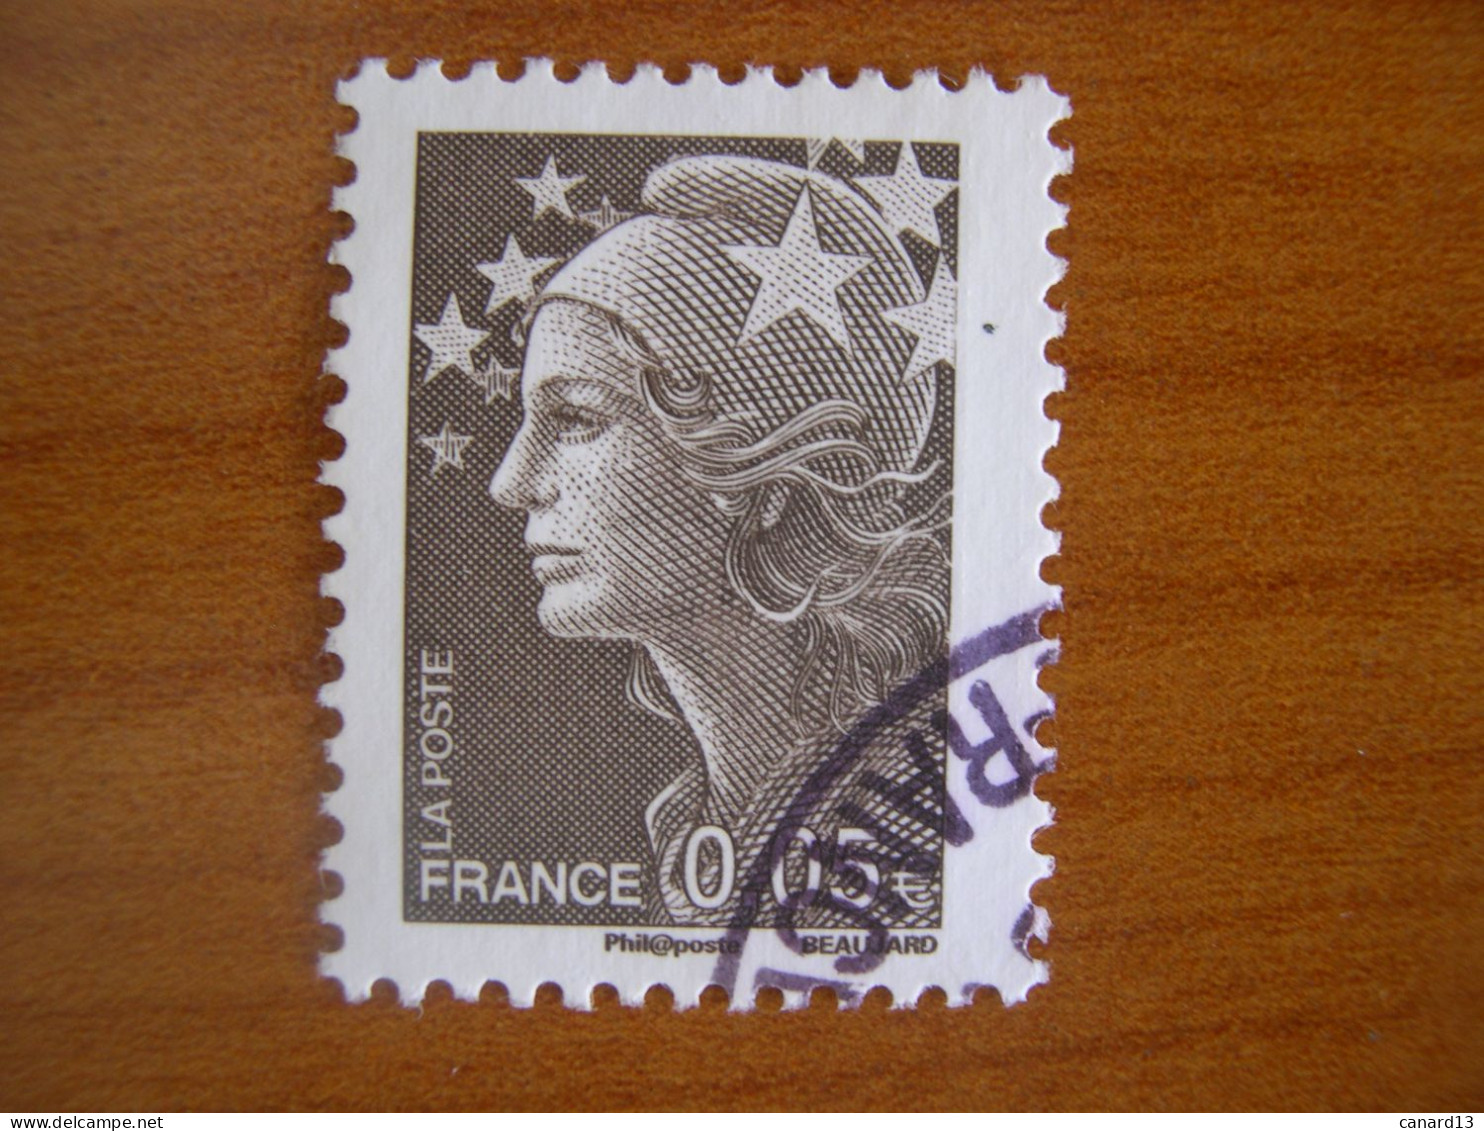 France Obl   Marianne N° 4227 Cachet Rond Noir - 2008-2013 Marianne Of Beaujard